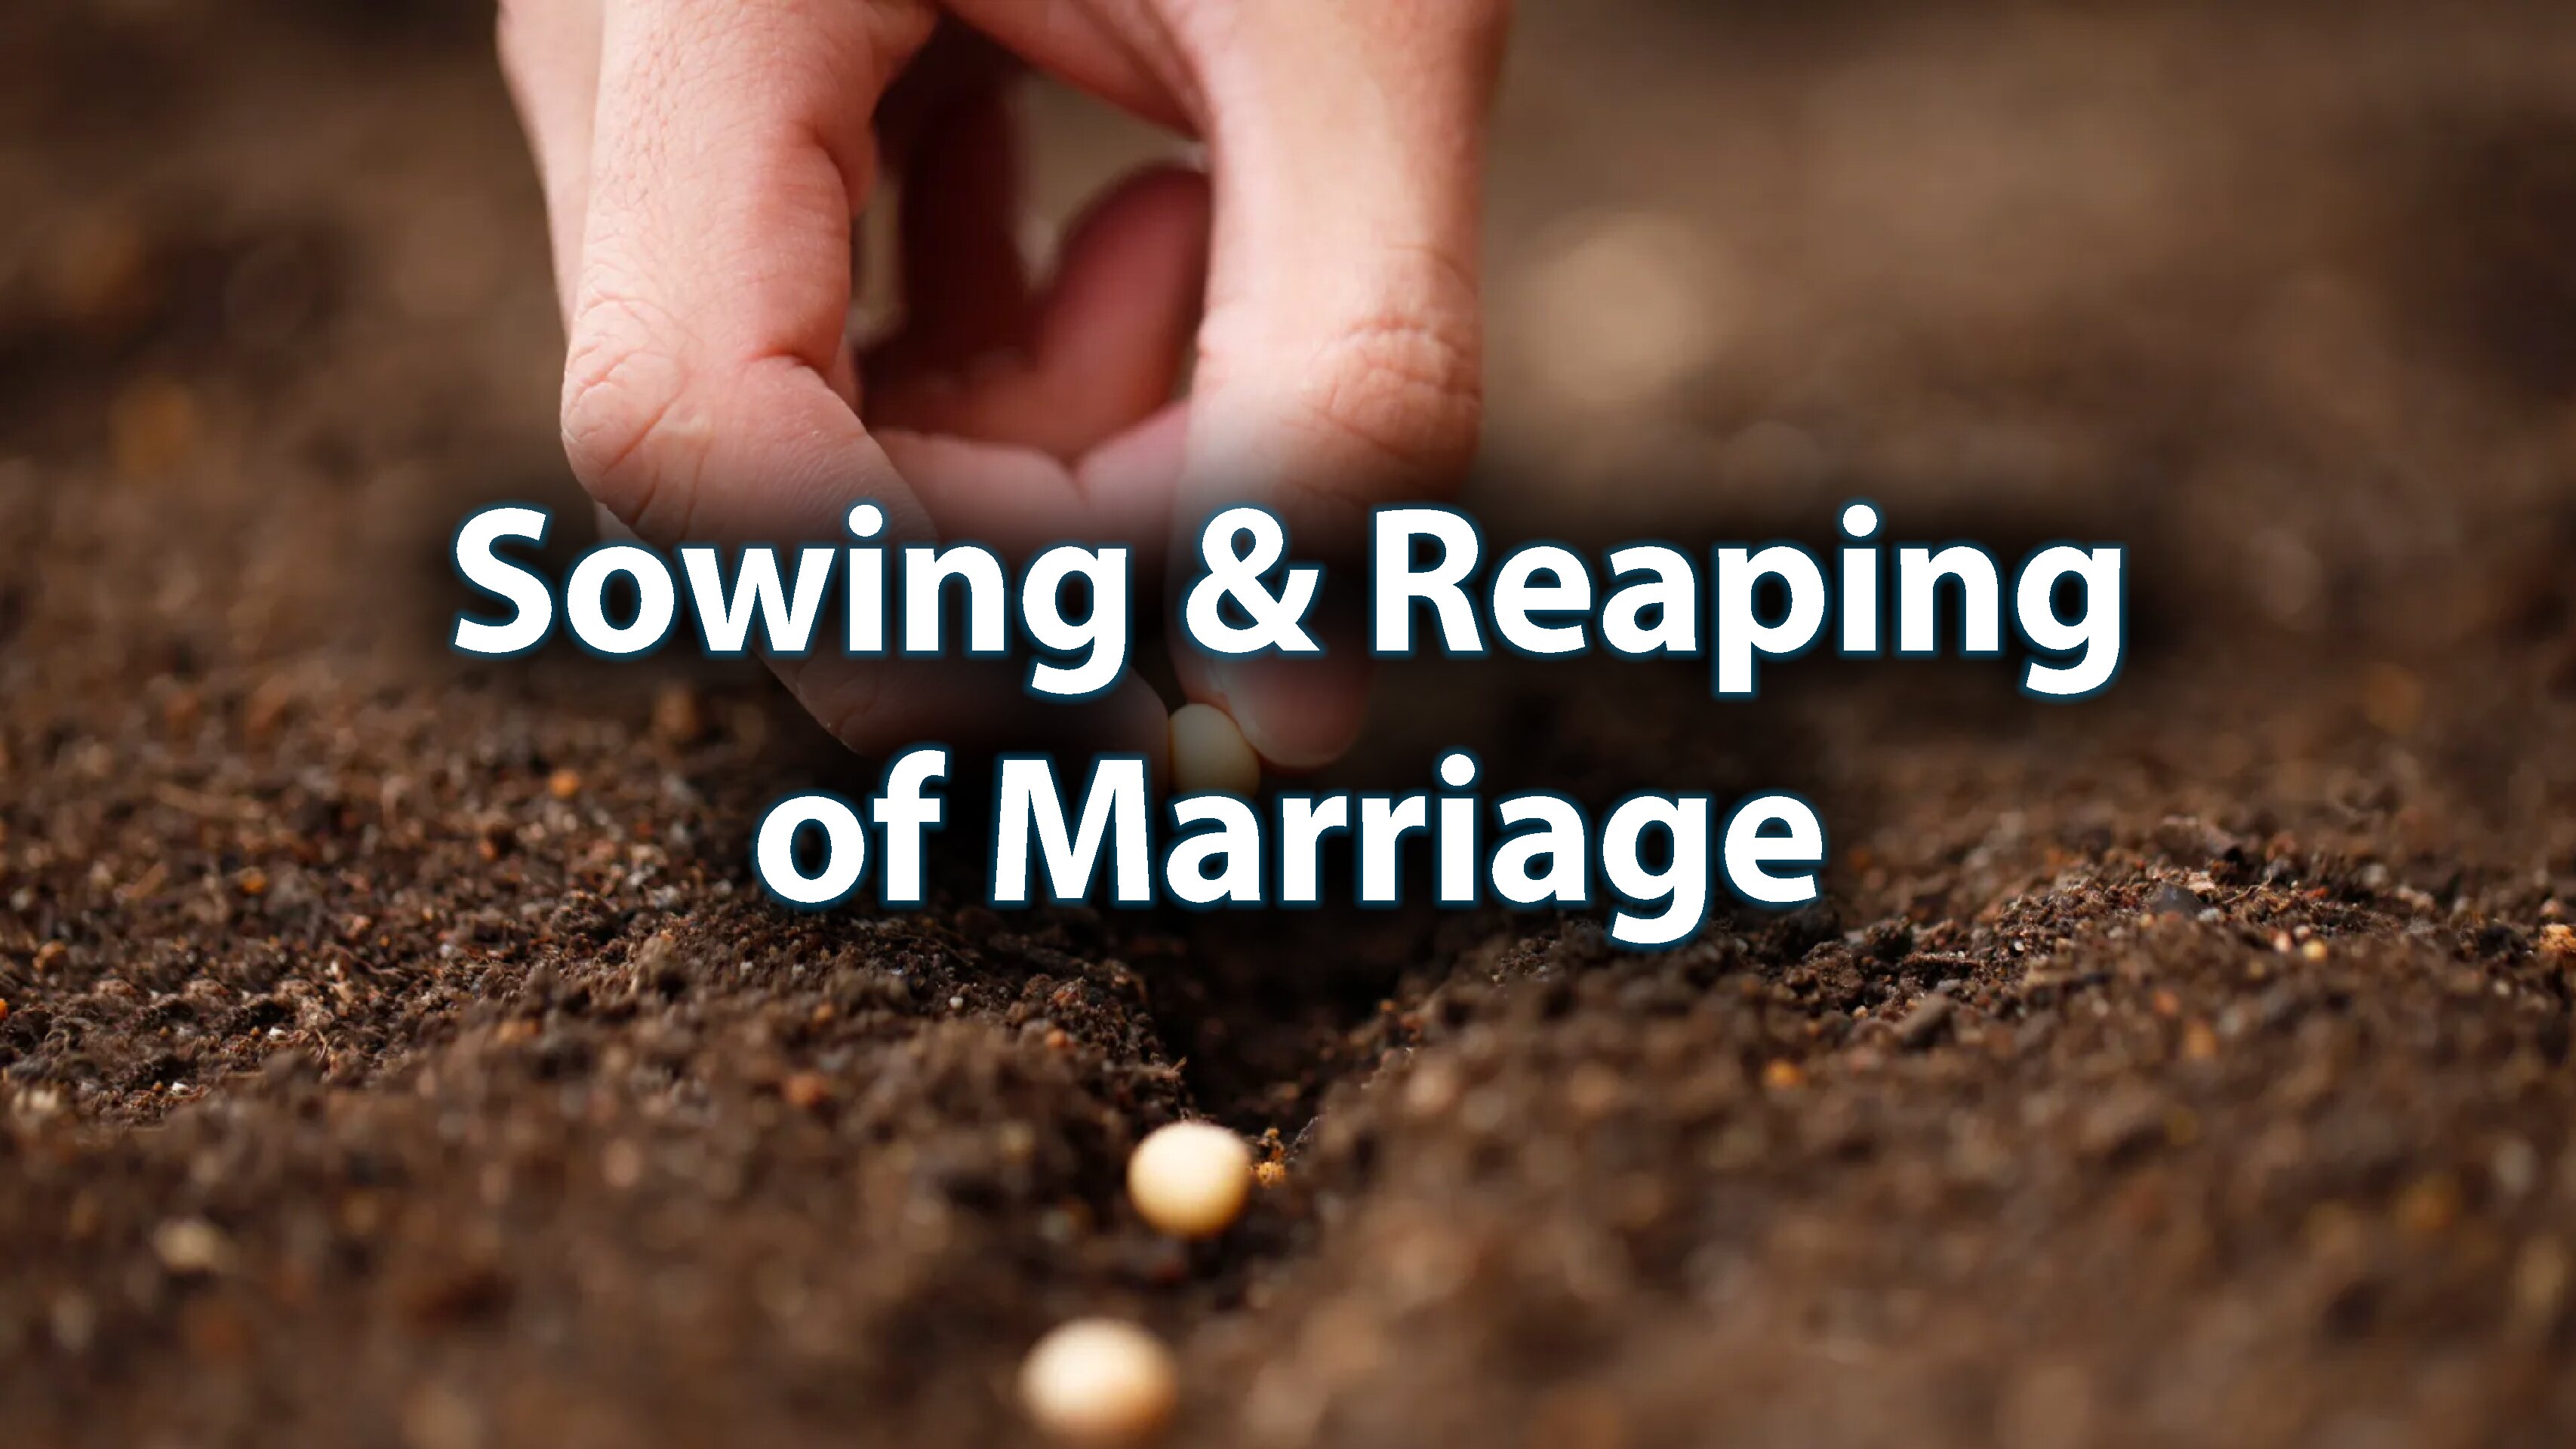 Day 25: Sowing & Reaping of Marriage